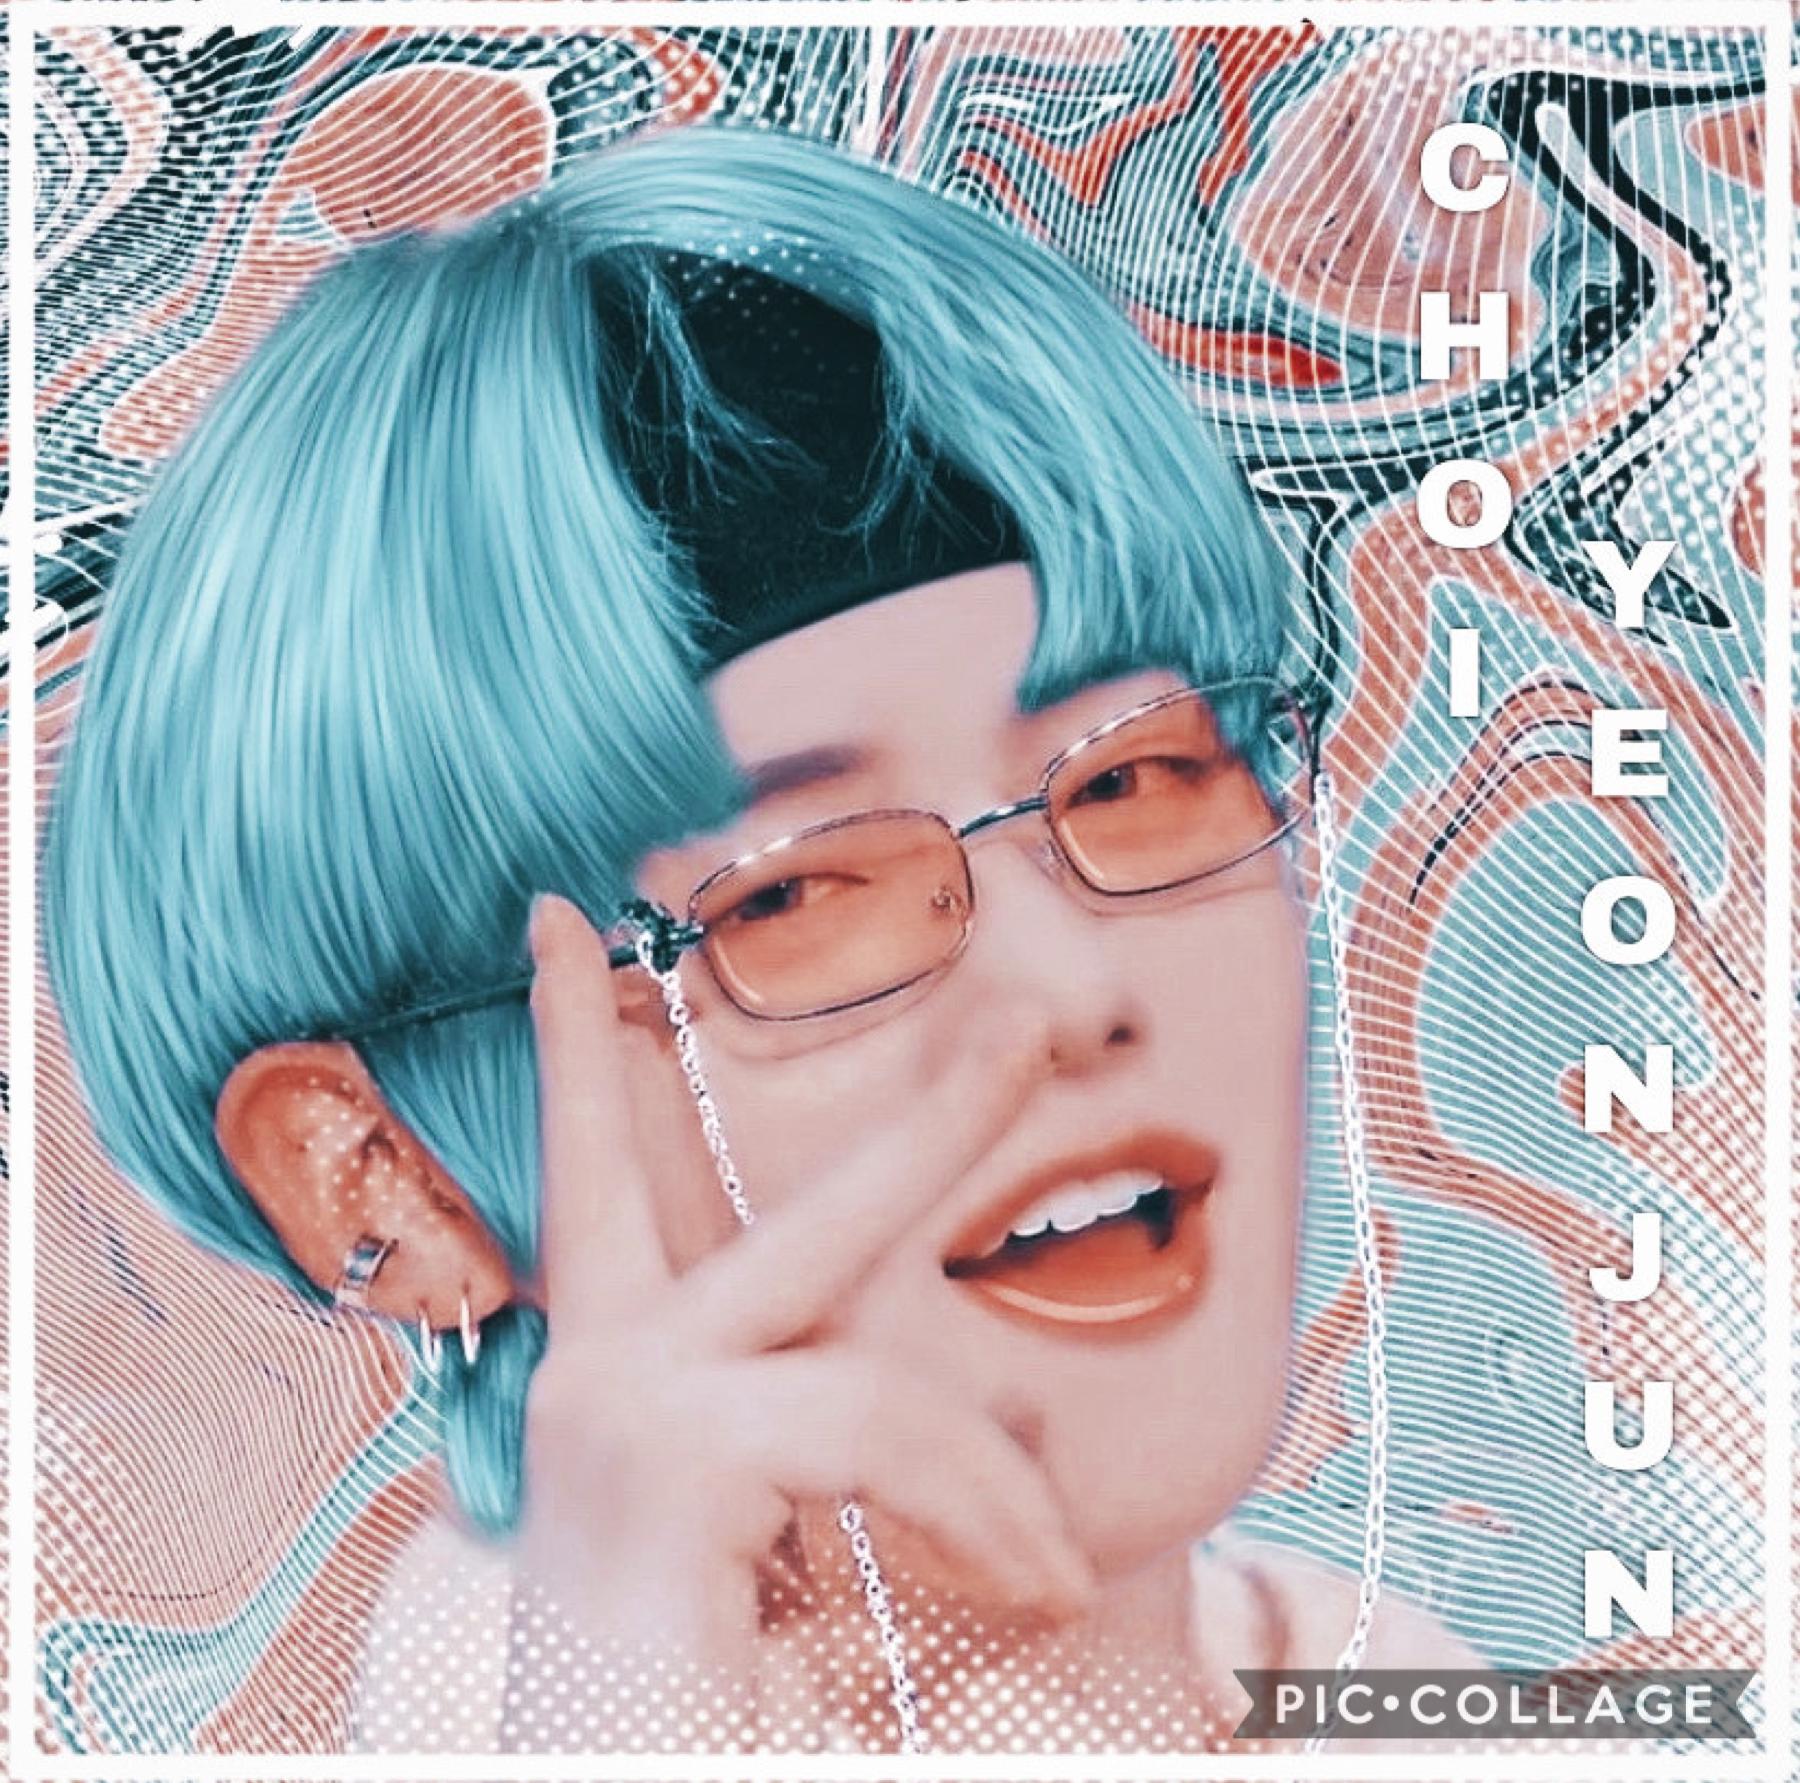 •✨•

heyy! here’s a collab with me bestie from PicsArt! @americanojoha plz go support her if u have a pa acct. she’s literally the sweetest person in the world💕

song of the day: tiger inside by super m, lowkey might be falling for super m 😙✌️